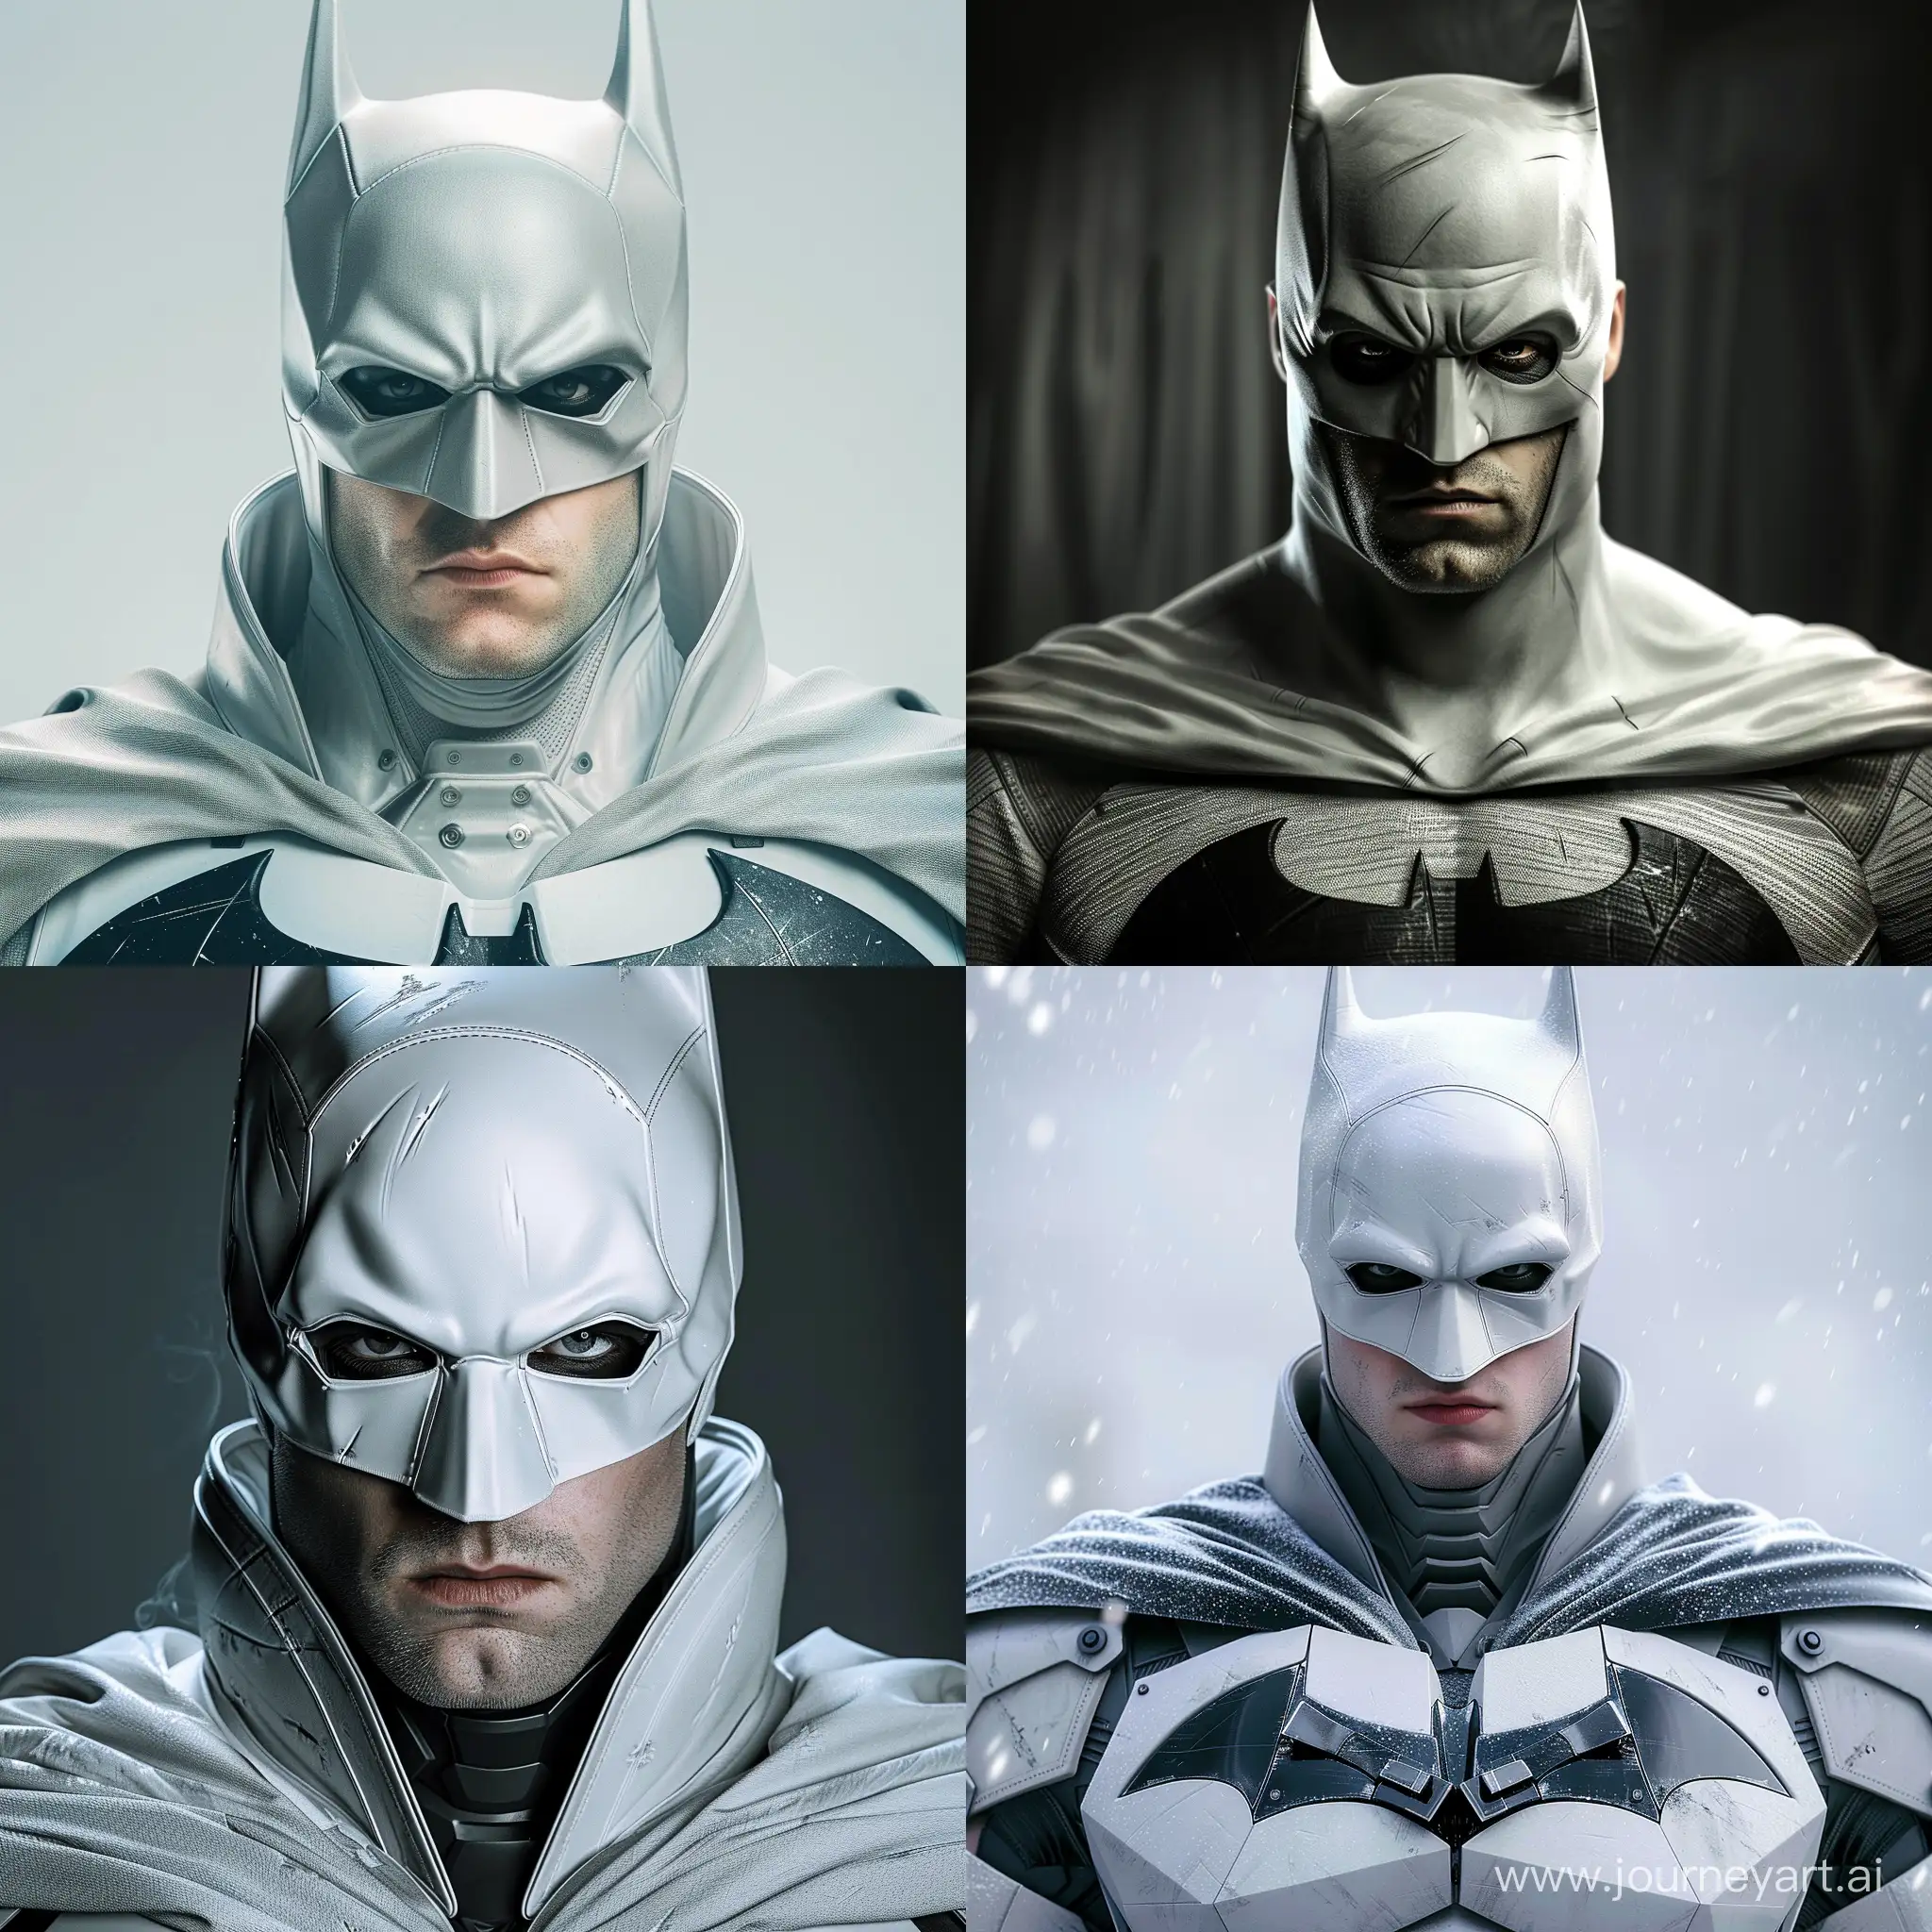 Robert Pattinson as Batman in White ultra-realistic, high resolution, with cinematic lighting intricate detail and superb quality